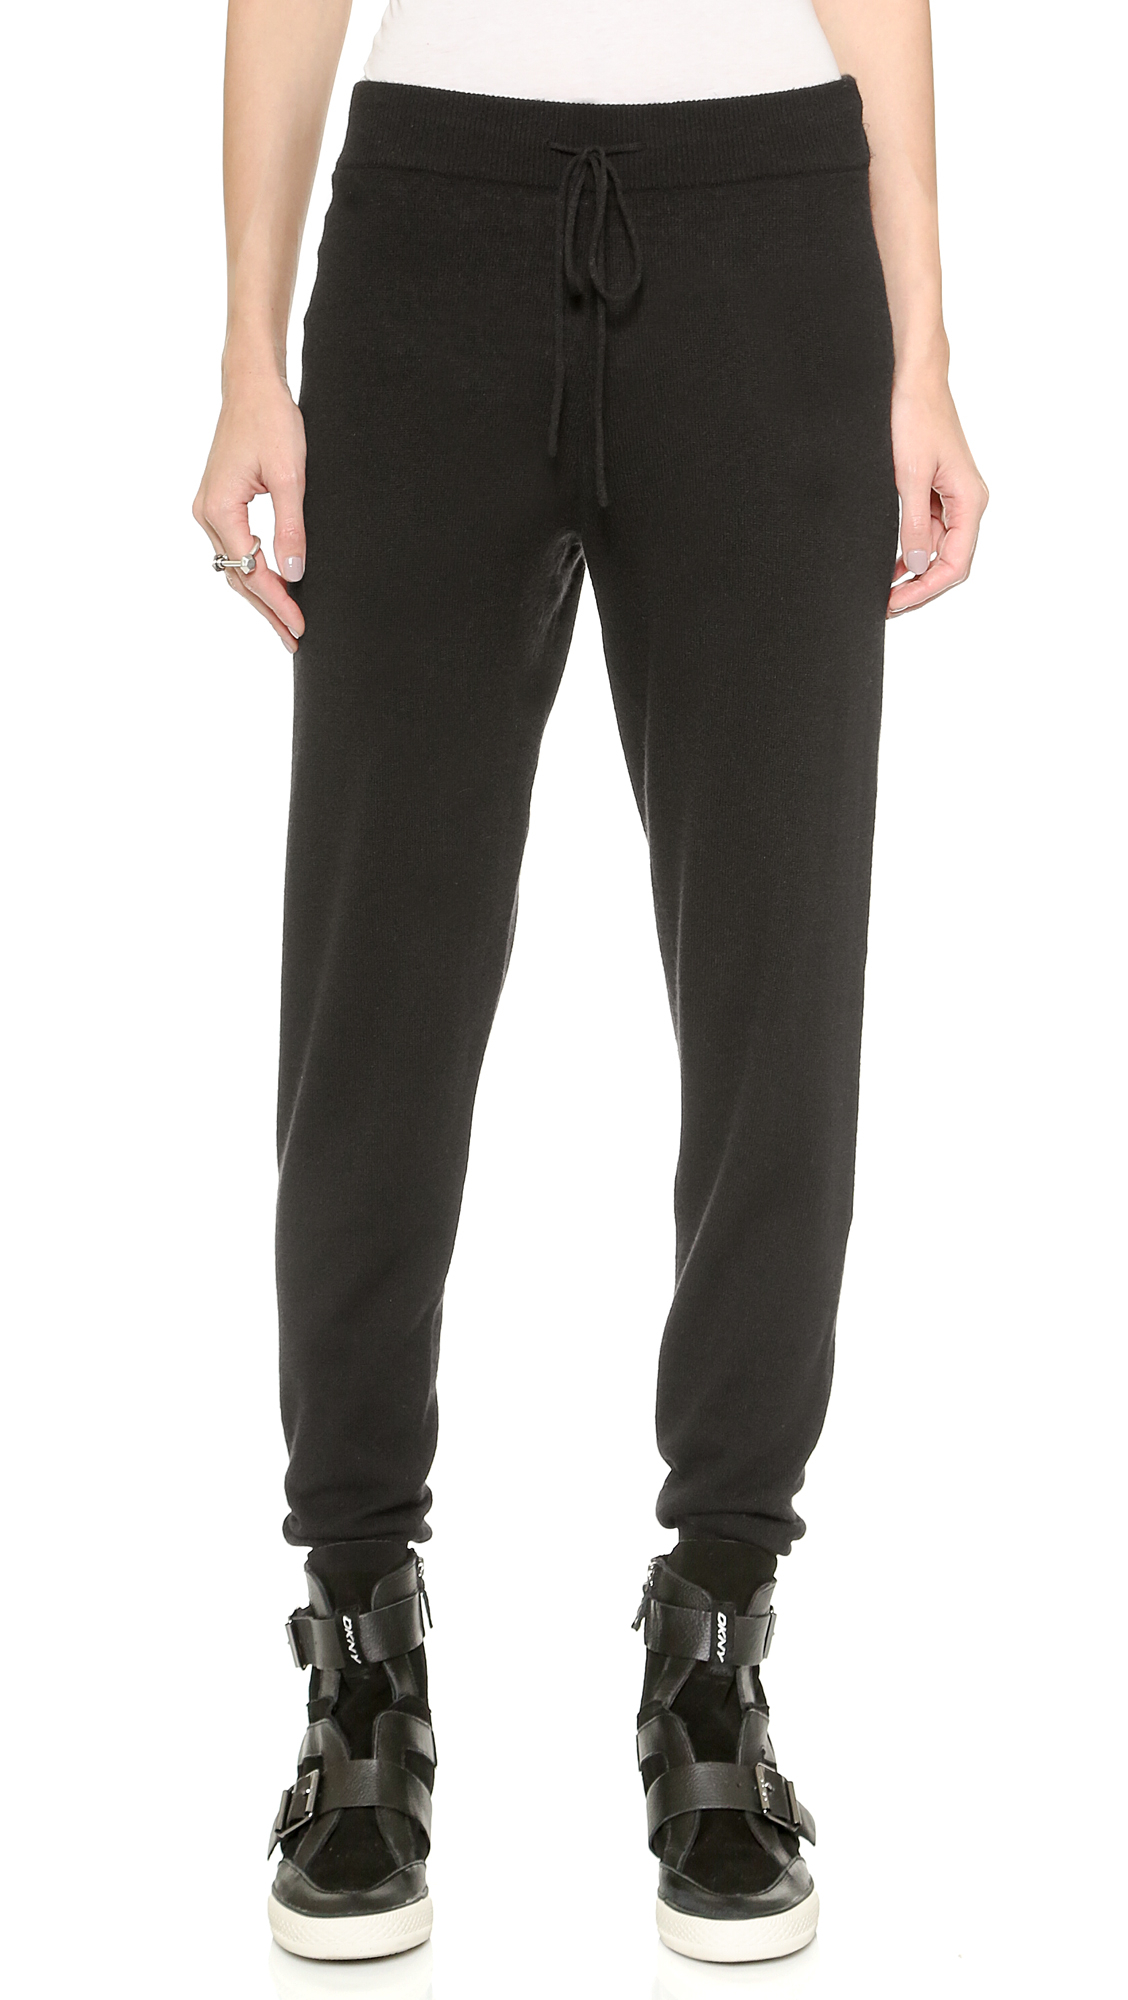 Lyst - Dkny Cashmere Pants with Drawstring - Black in Black